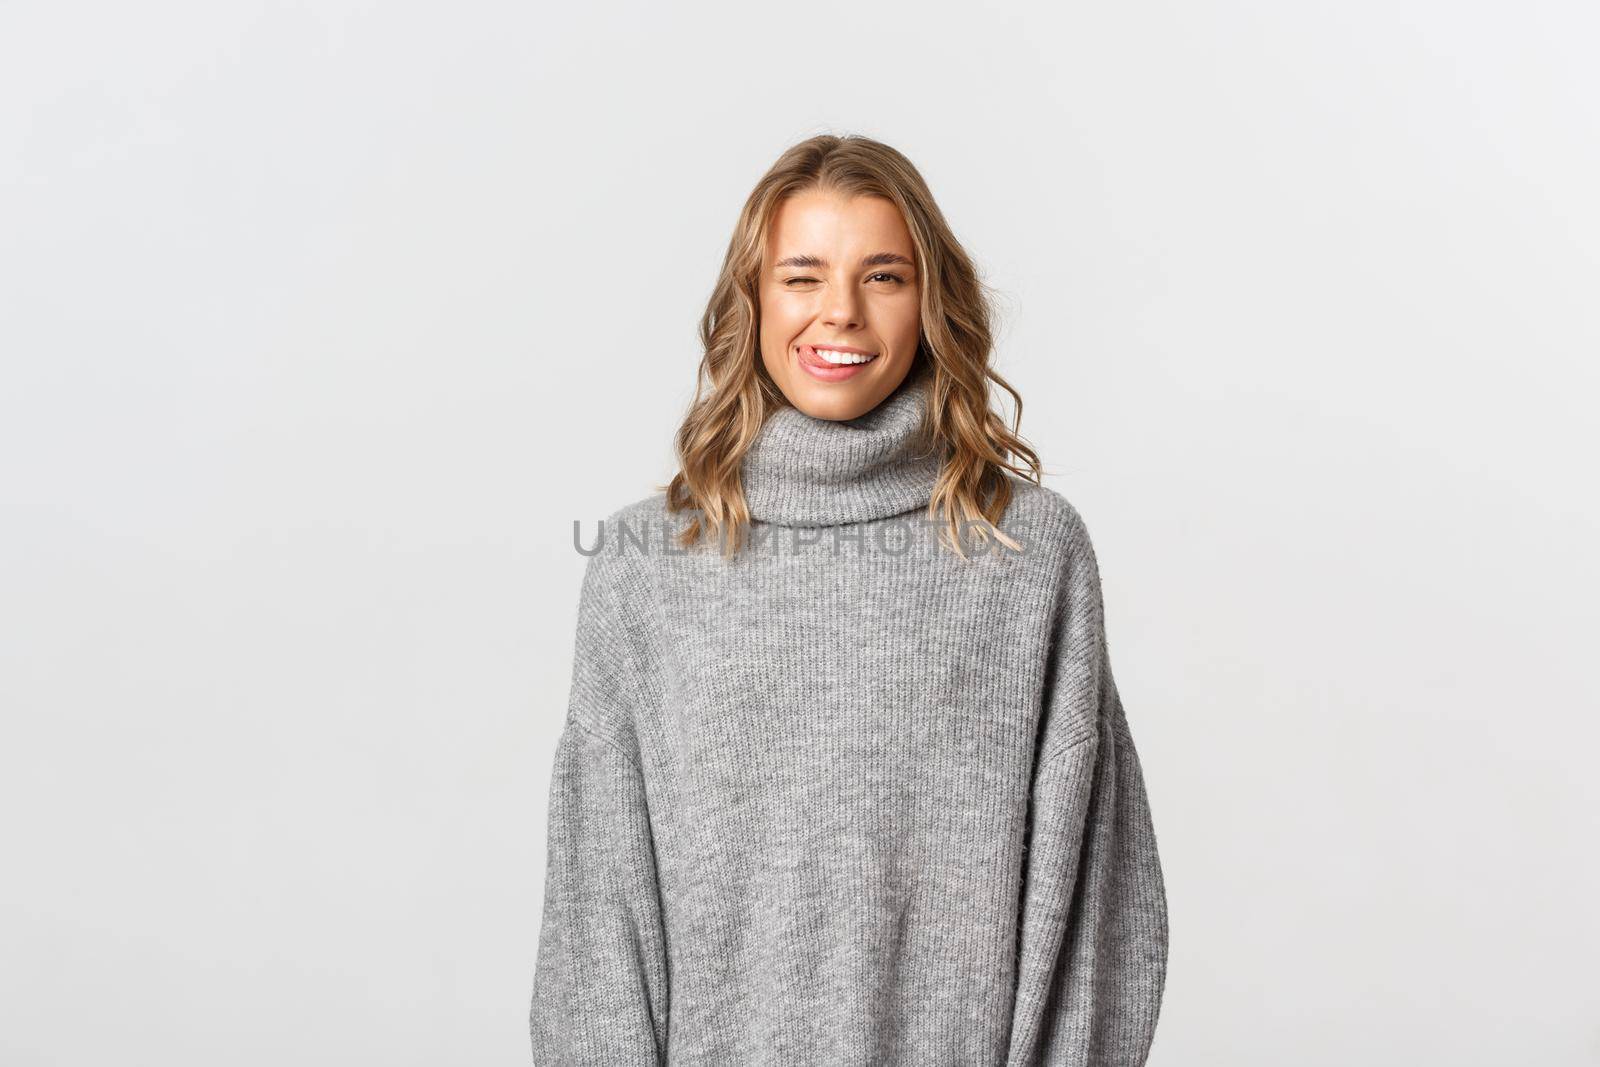 Sassy attractive blond girl in grey sweater winking, showing tongue and flirting with someone, standing over white background.